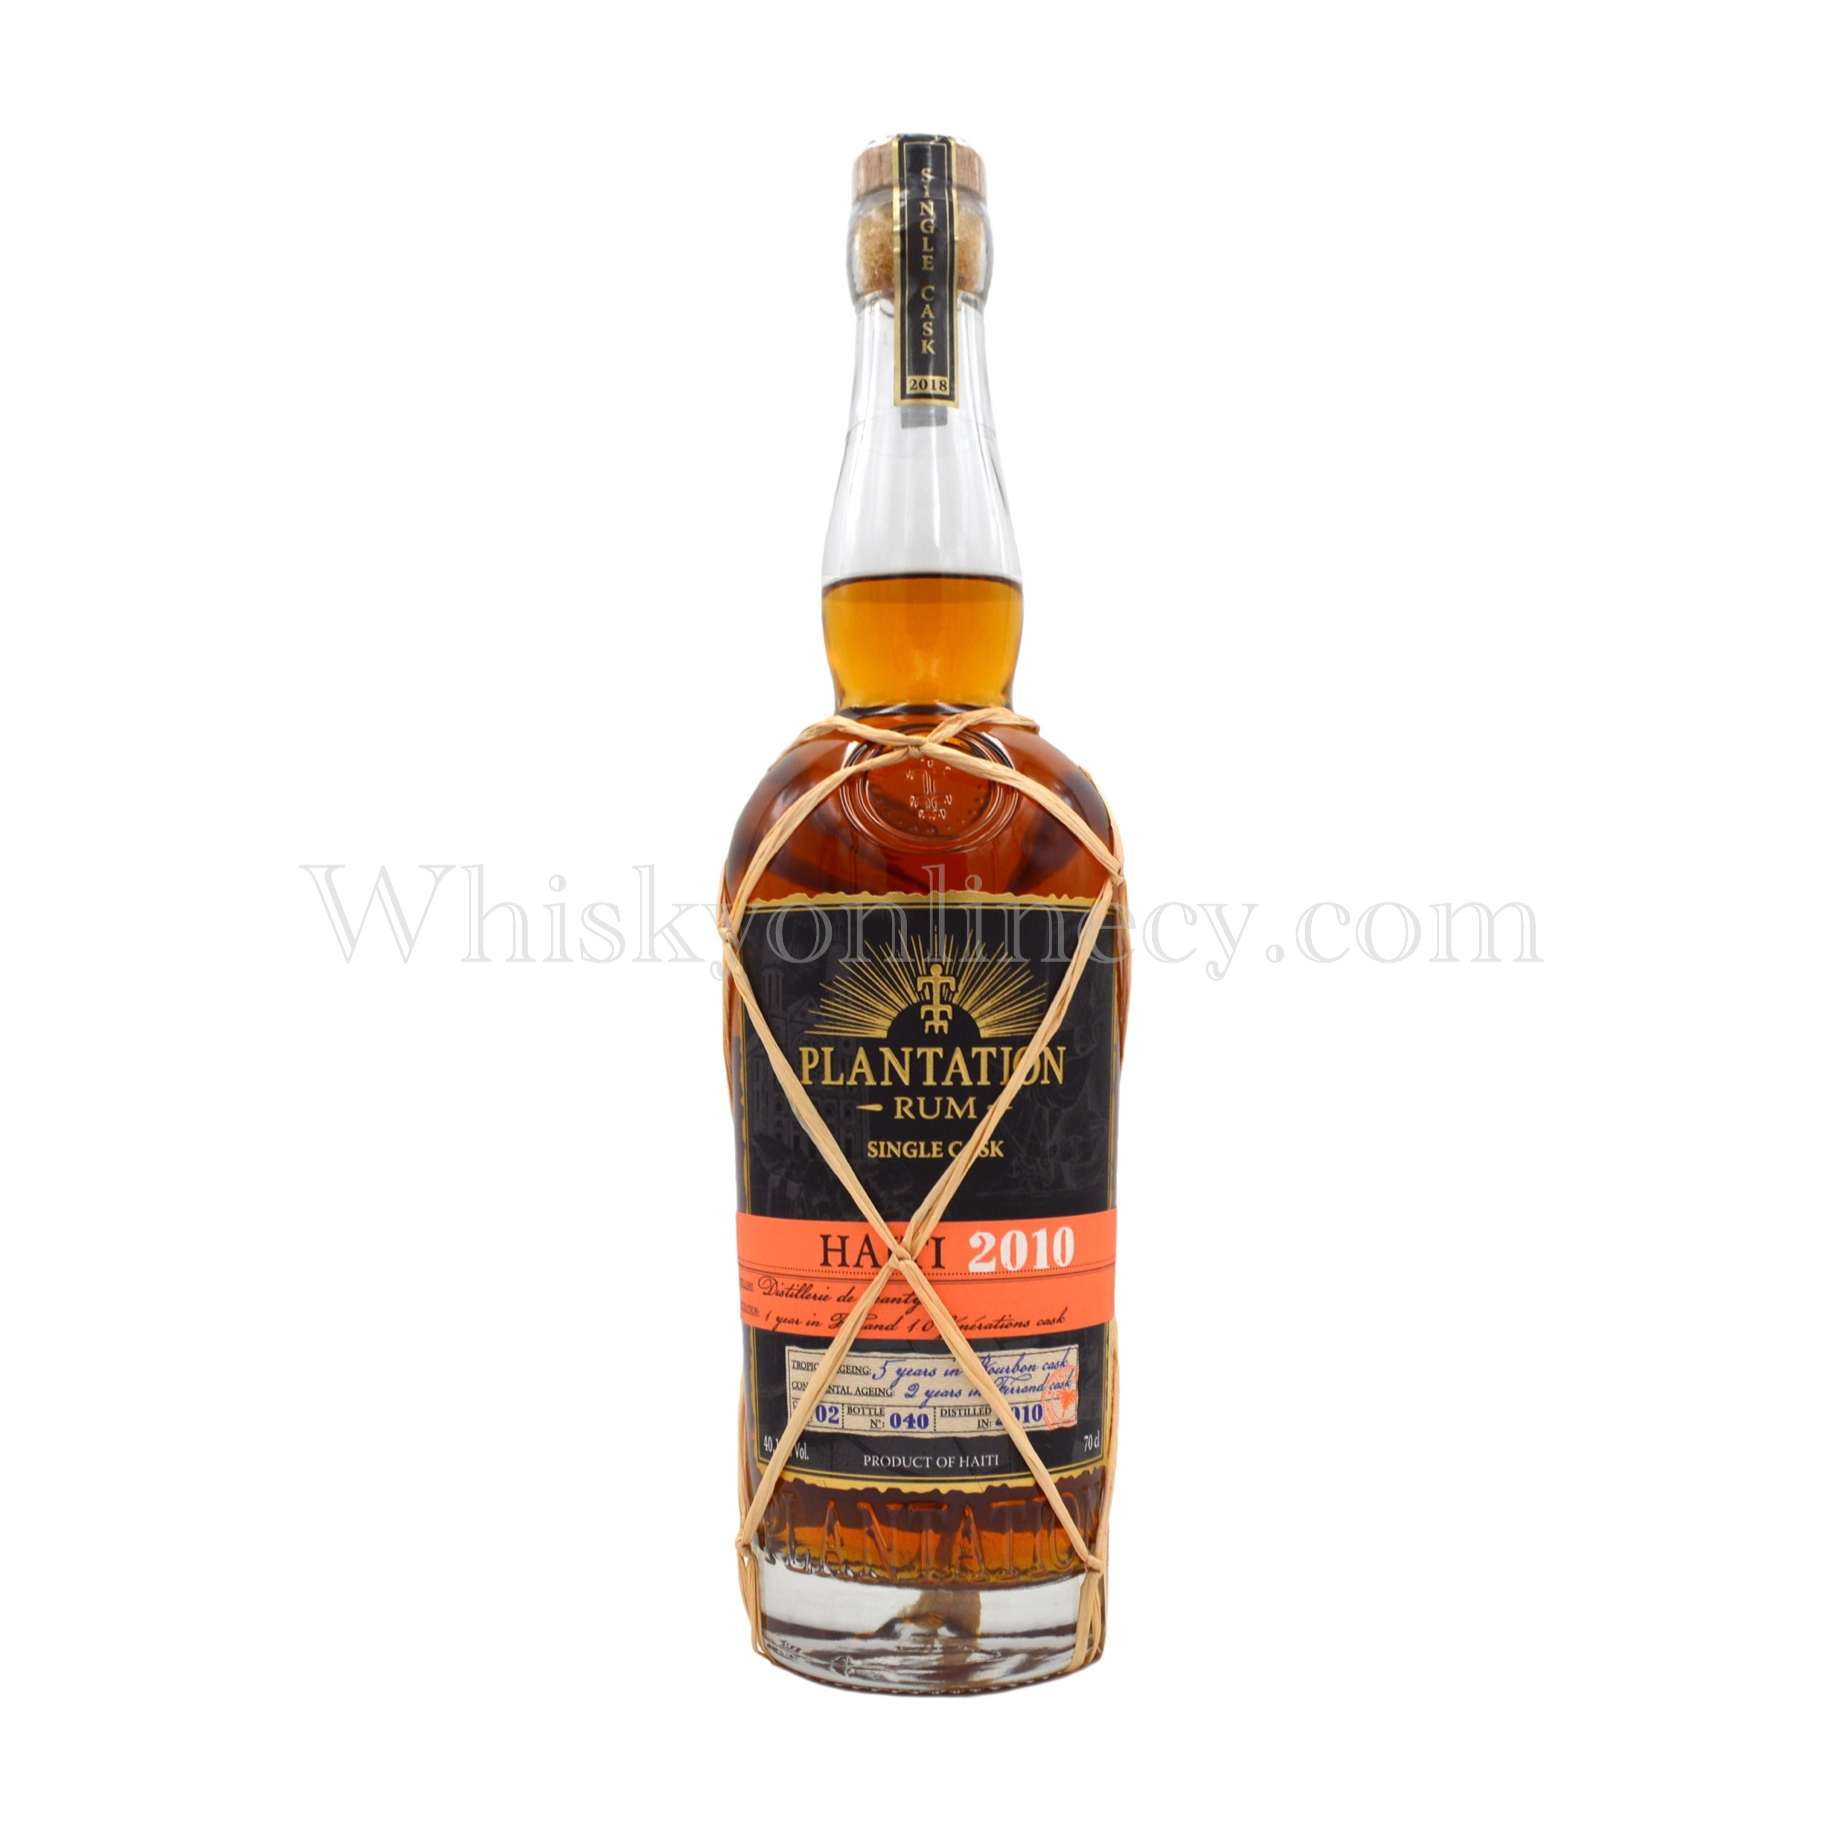 Archives Online Cyprus - 6 8 Whisky Page - Rum of